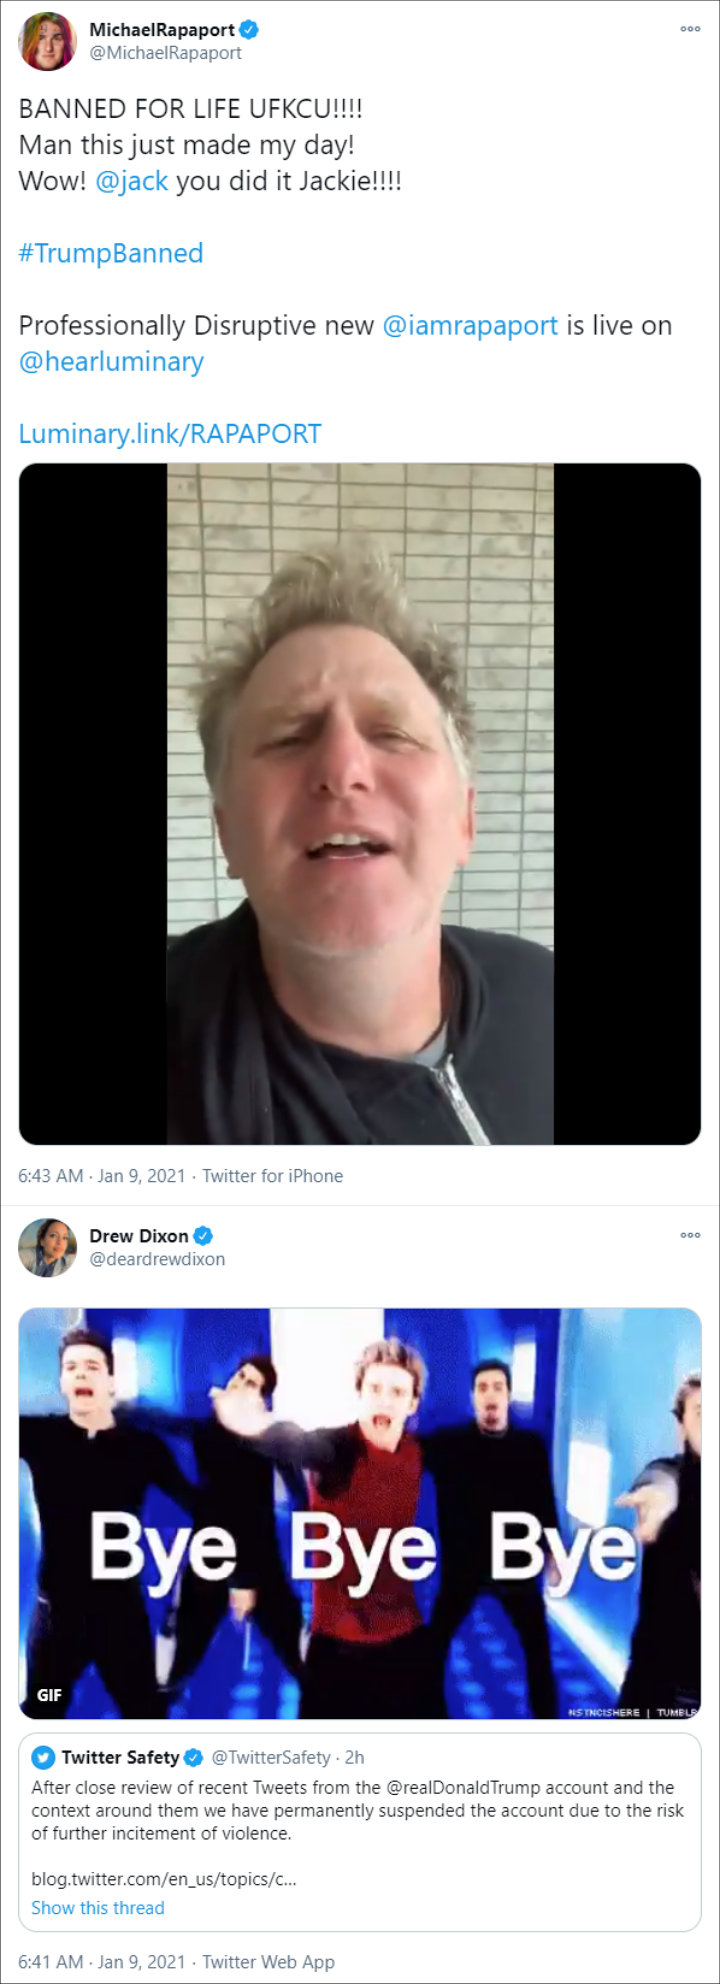 Michael Rapaport and Drew Dixon also reacted to Trump's Twitter ban